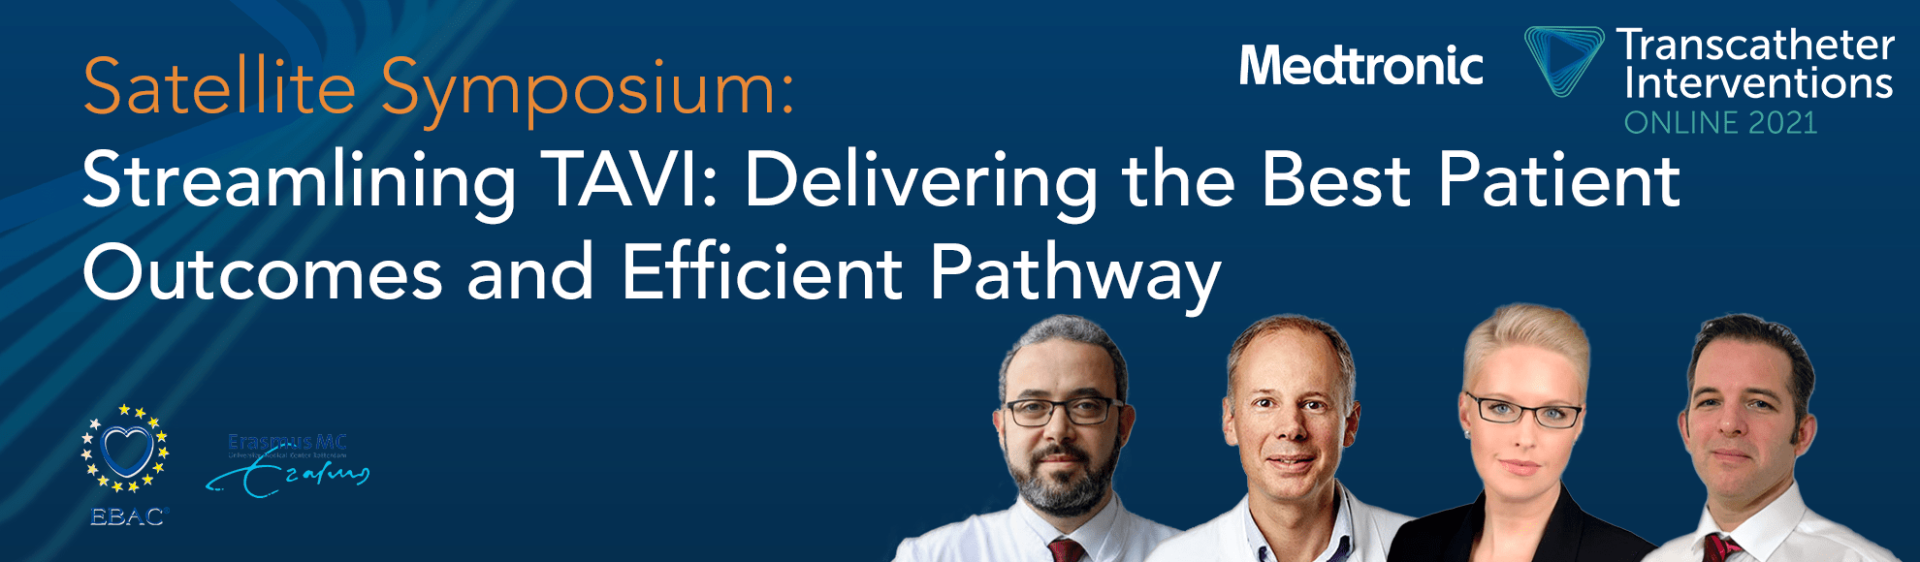 Streamlining TAVI: Delivering the Best Patients Outcomes and Efficient Pathways